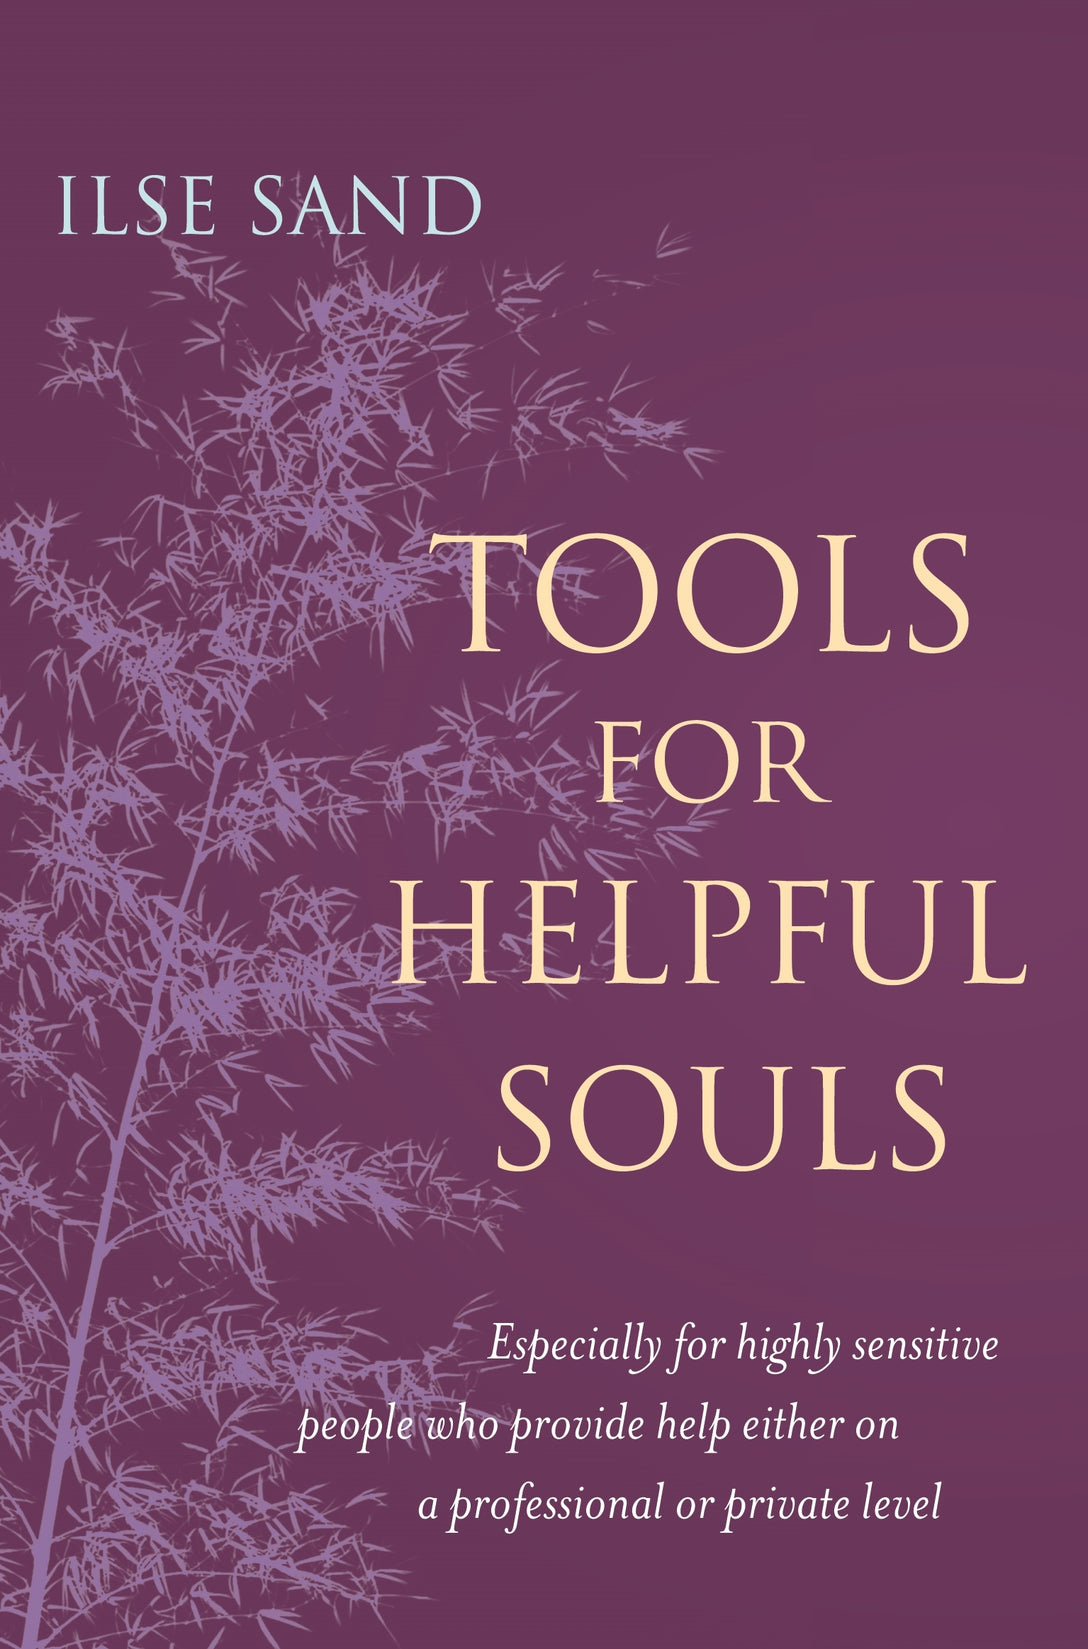 Tools for Helpful Souls by Ilse Sand